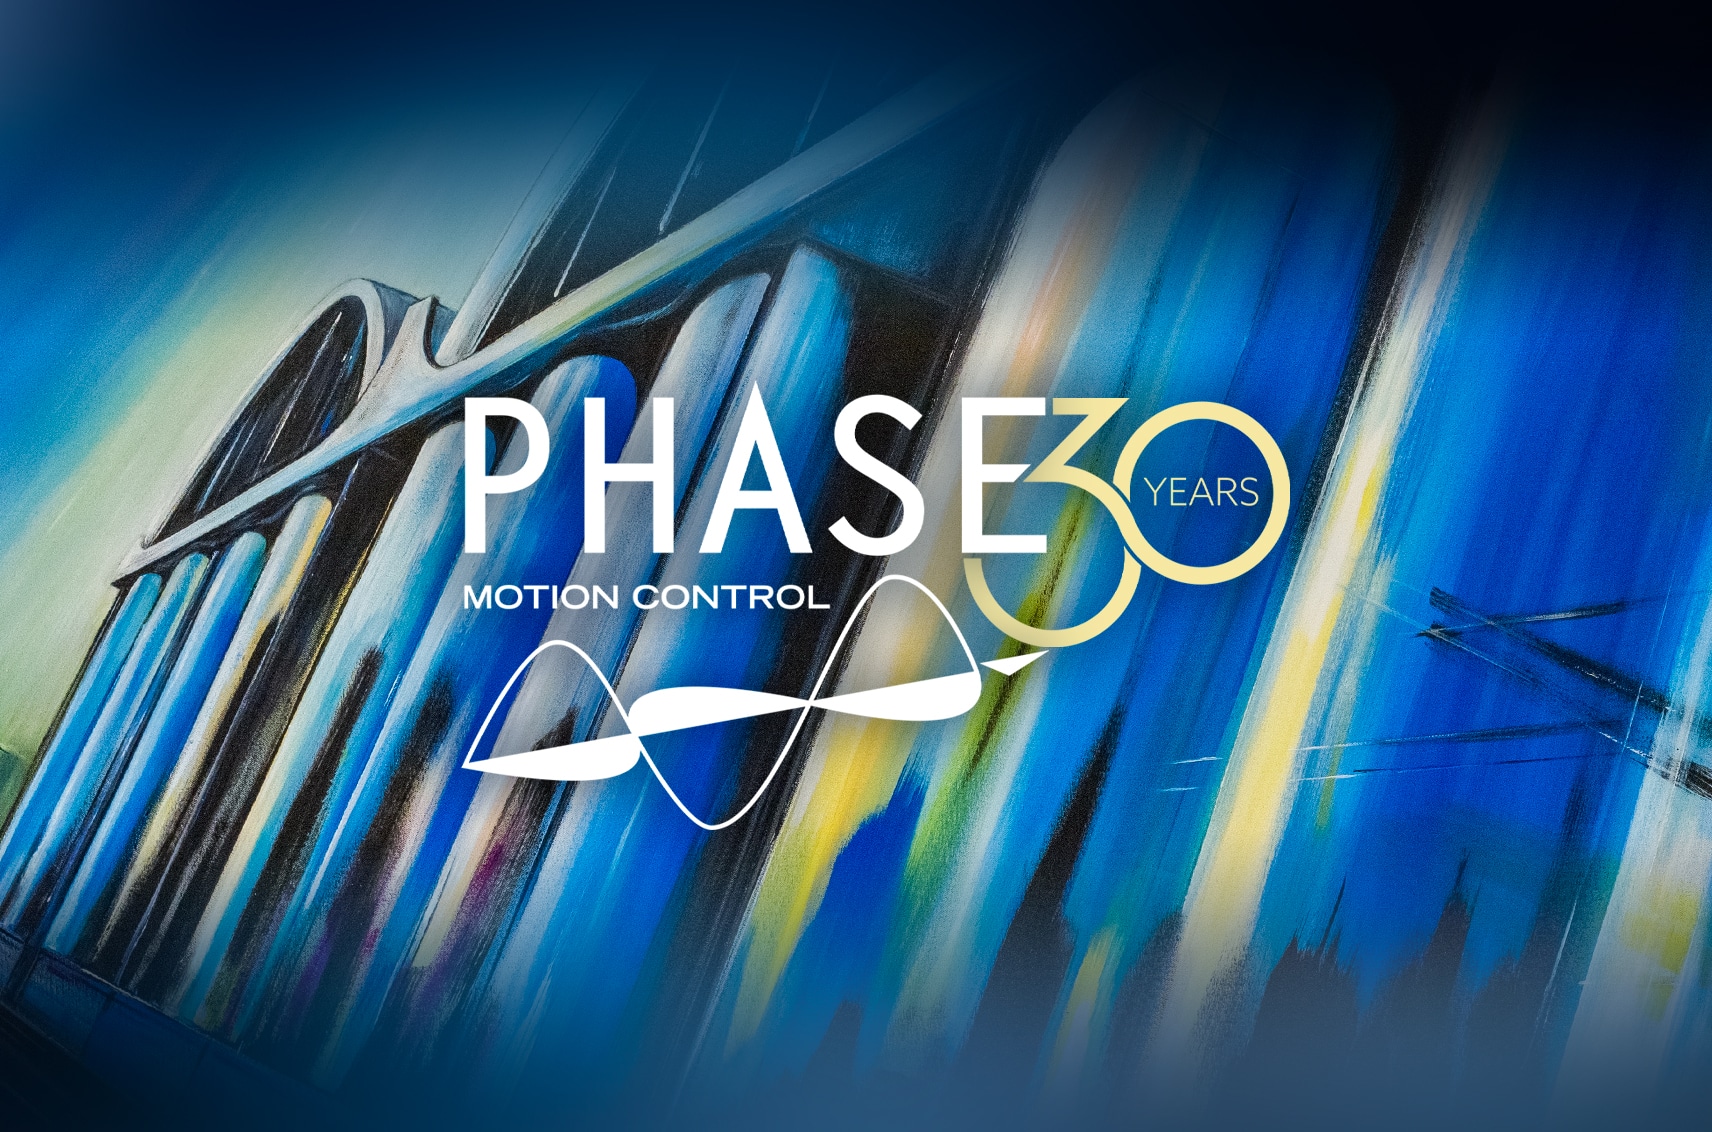 Phase Motion Control 30 Years